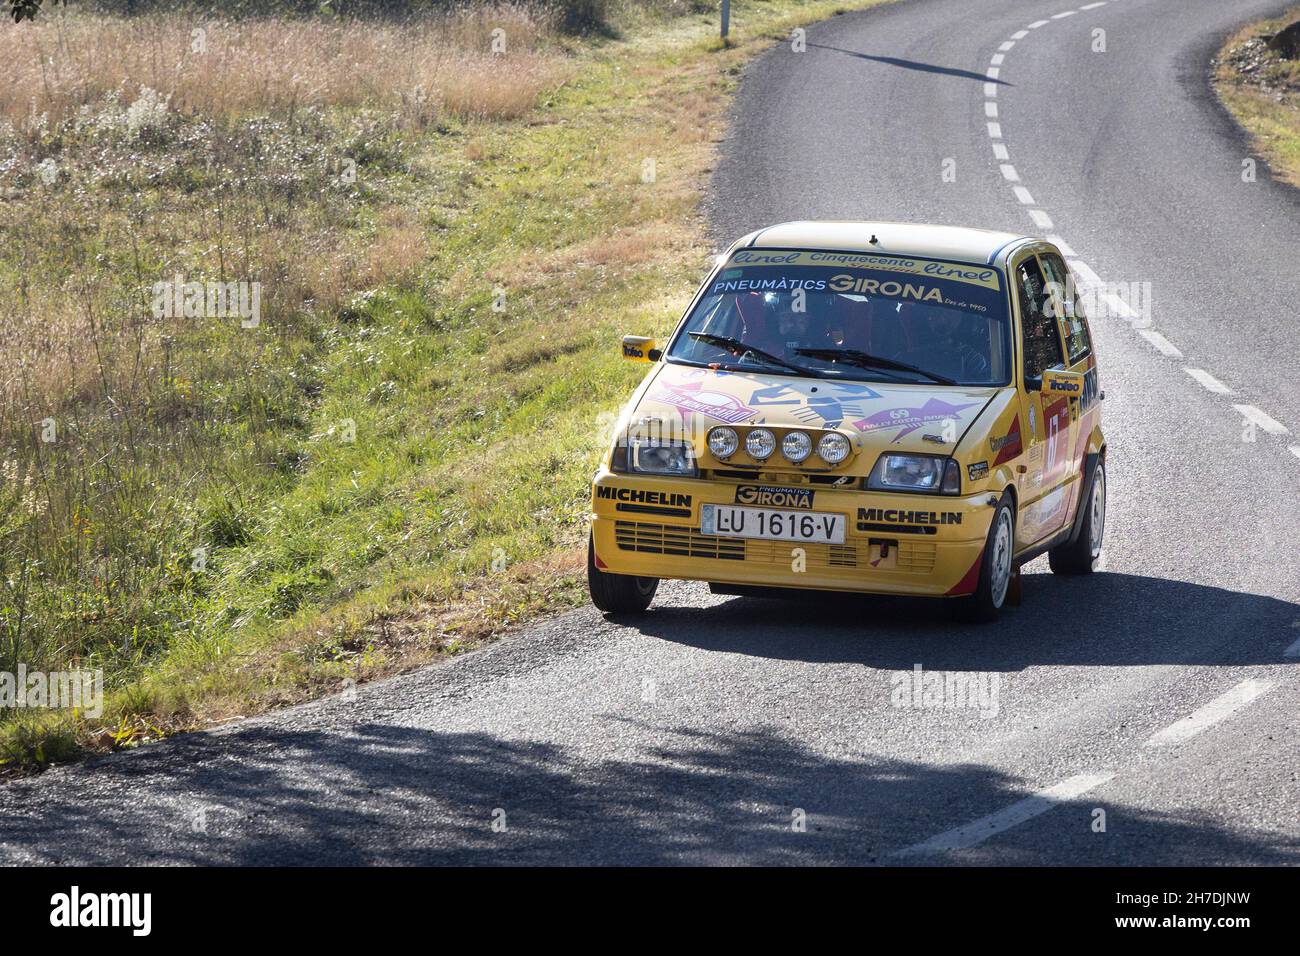 Fiat Cinquecento taking part in the timed section of the Rally Costa Brava 2021 in Girona, Spain Stock Photo